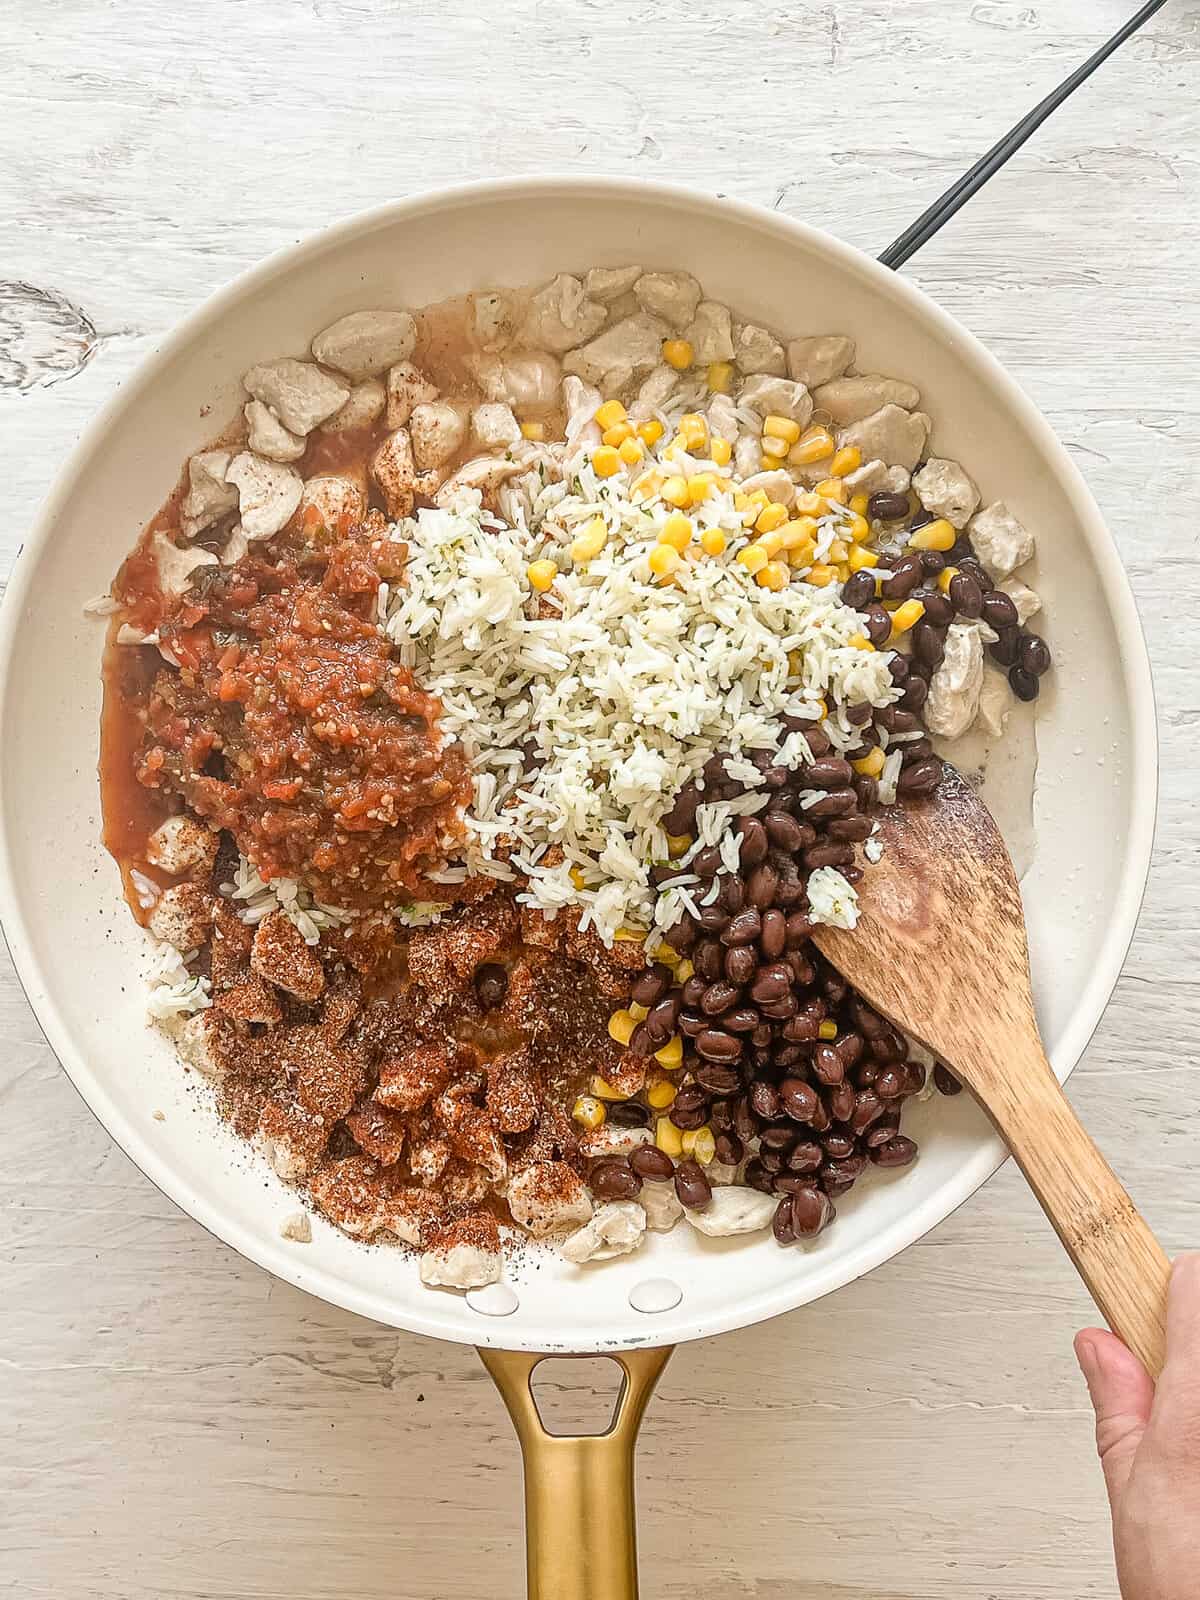 Rice, beans, corn, seasonings, and salsa on top of cooked chicken in a ceramic skillet ready to be mixed for Chicken Burritos.